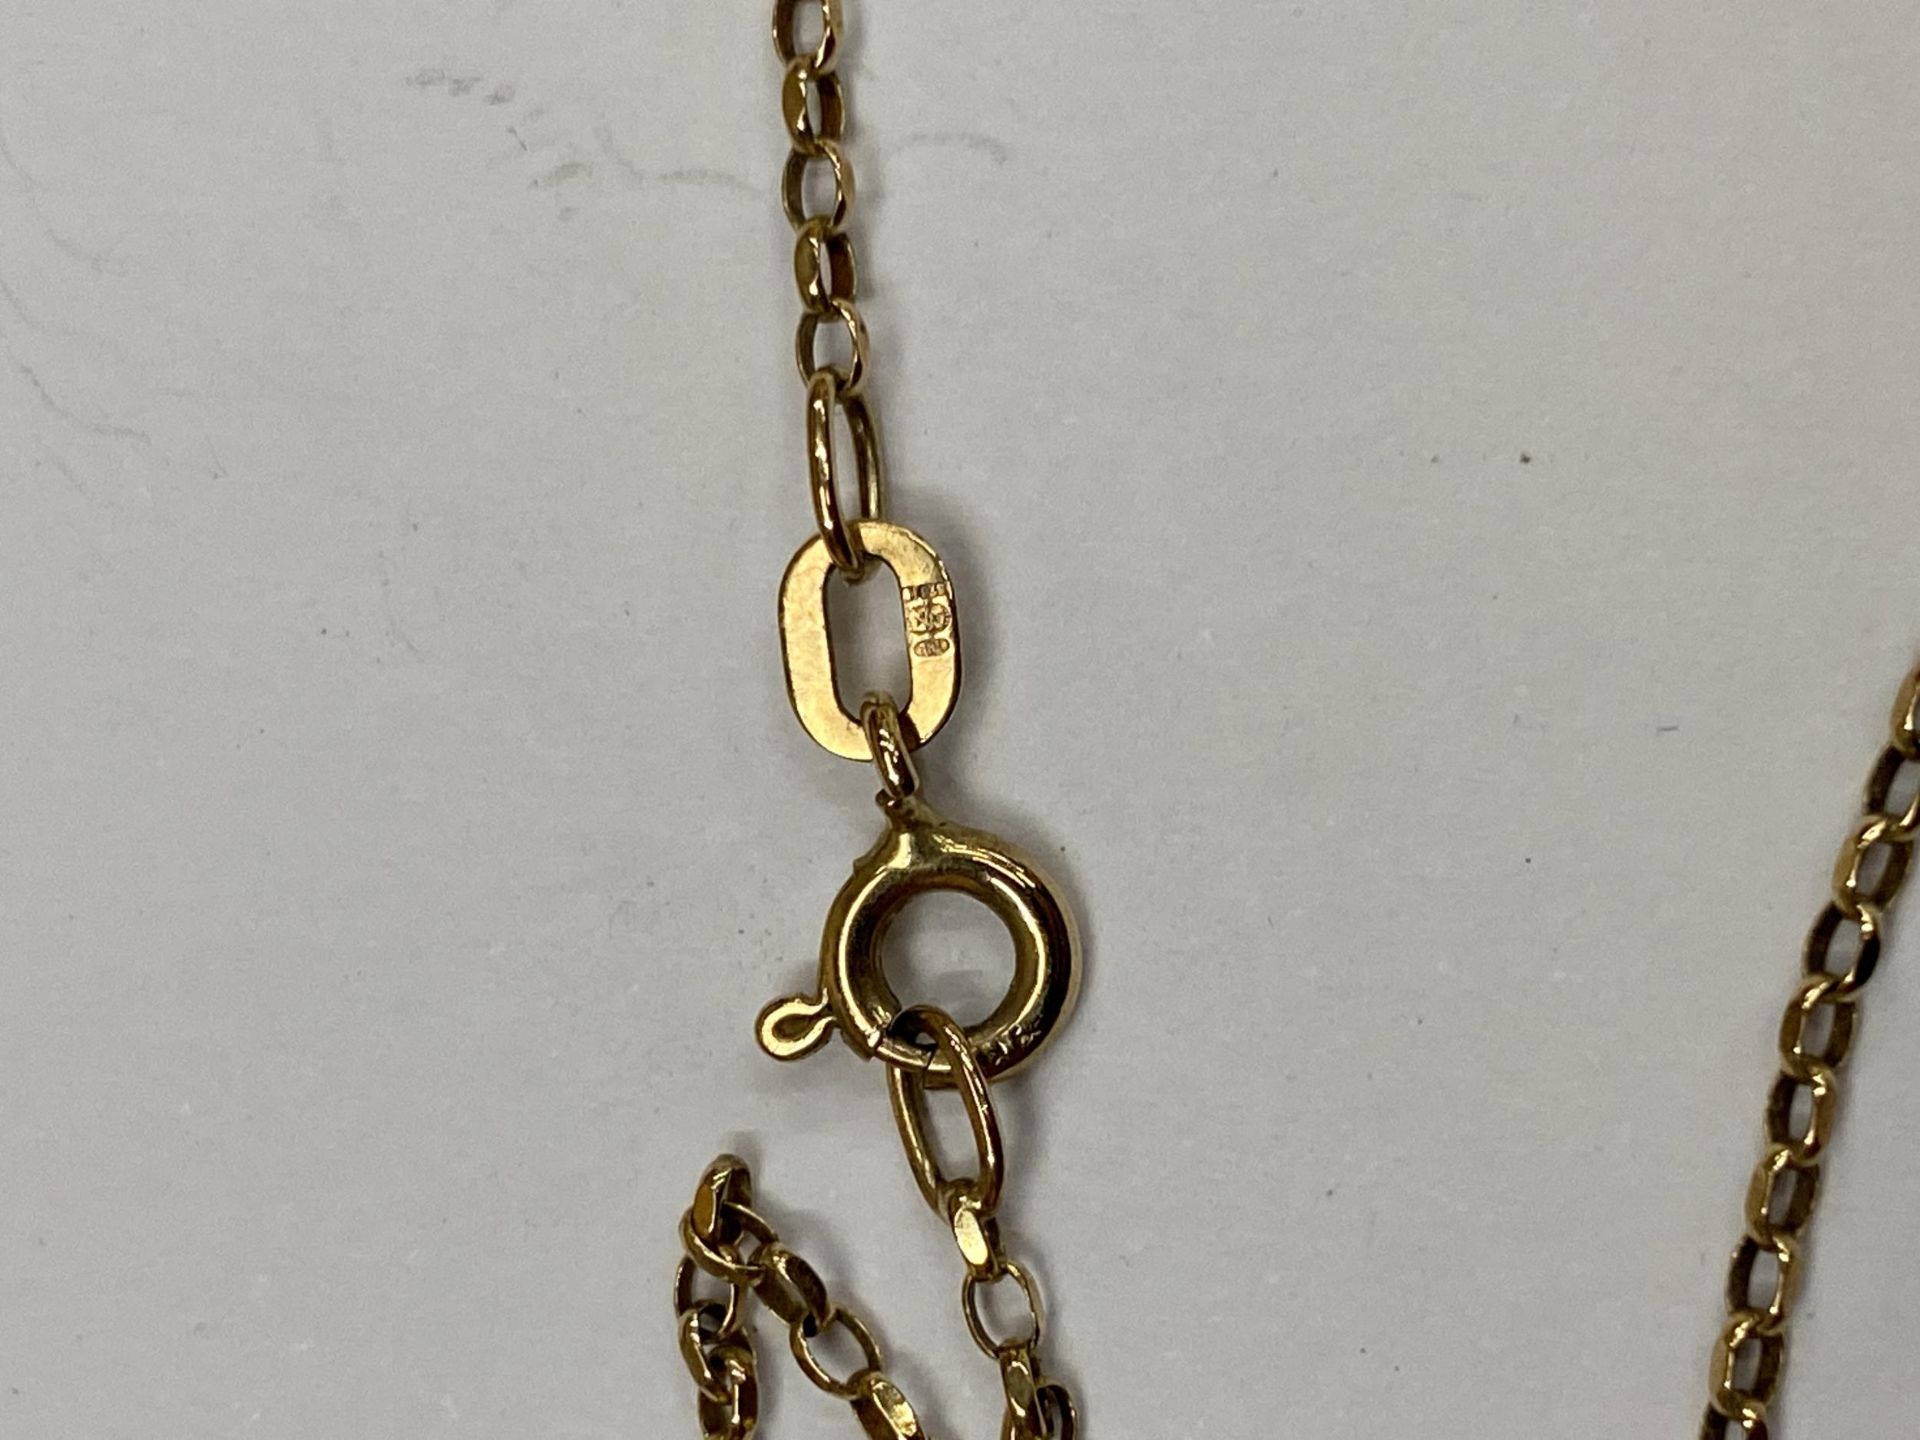 A 9CT YELLOW GOLD NECKLACE WITH CROSS PENDANT, TOTAL WEIGHT 2.96G - Image 3 of 3